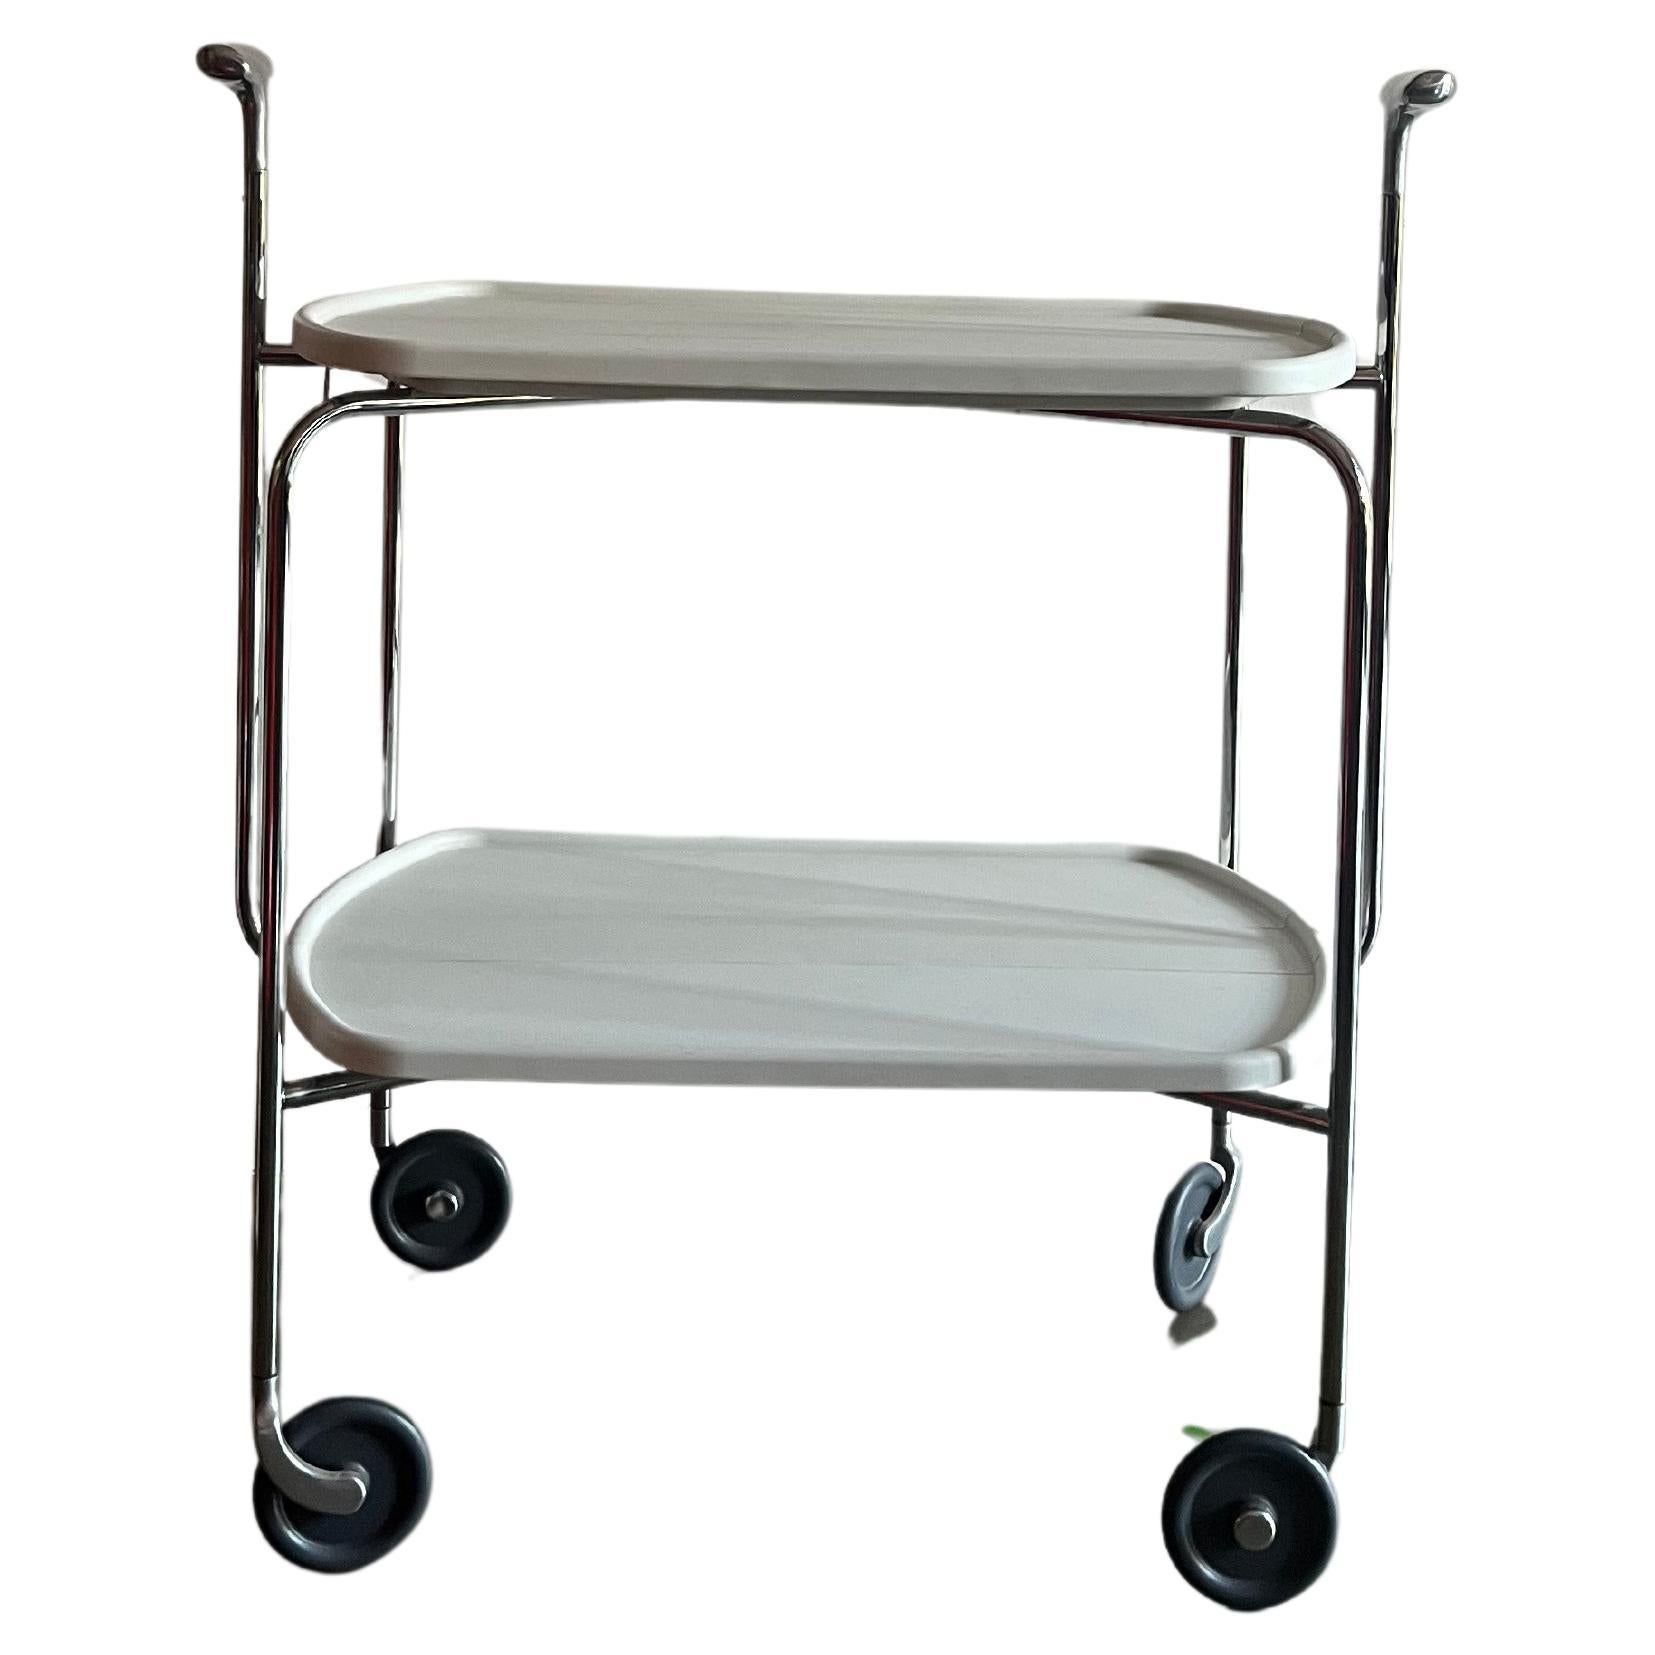 Transit food trolley - Davide Mellor for Magis made in Italy For Sale